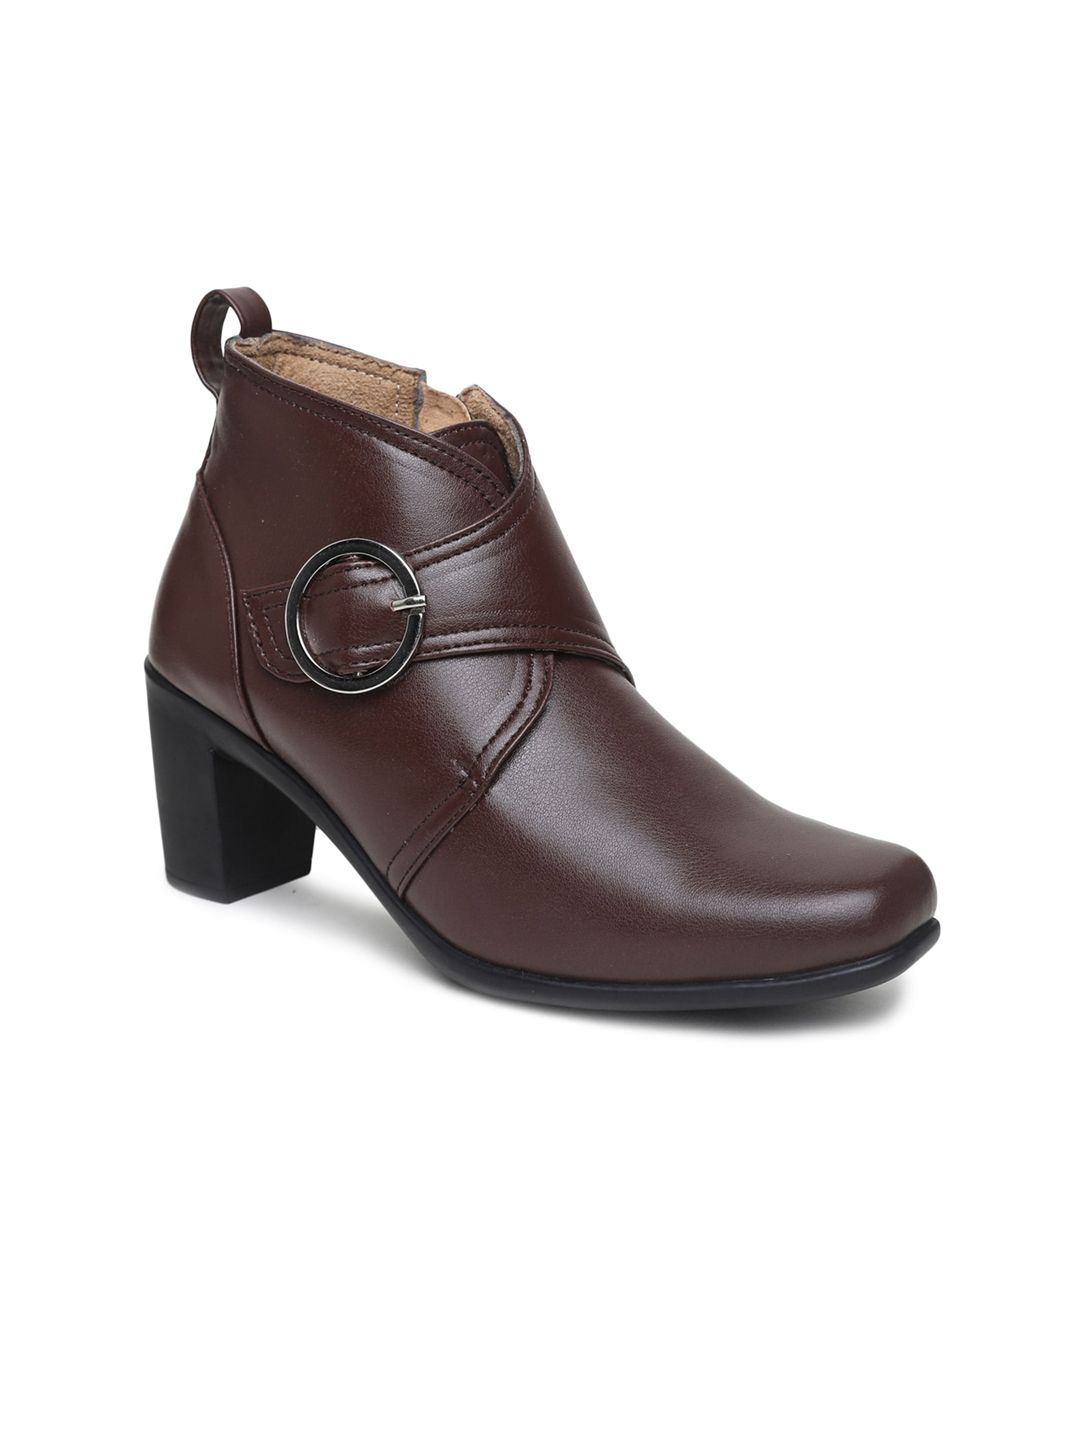 VALIOSAA Brown Block Heeled Boots with Buckles Price in India